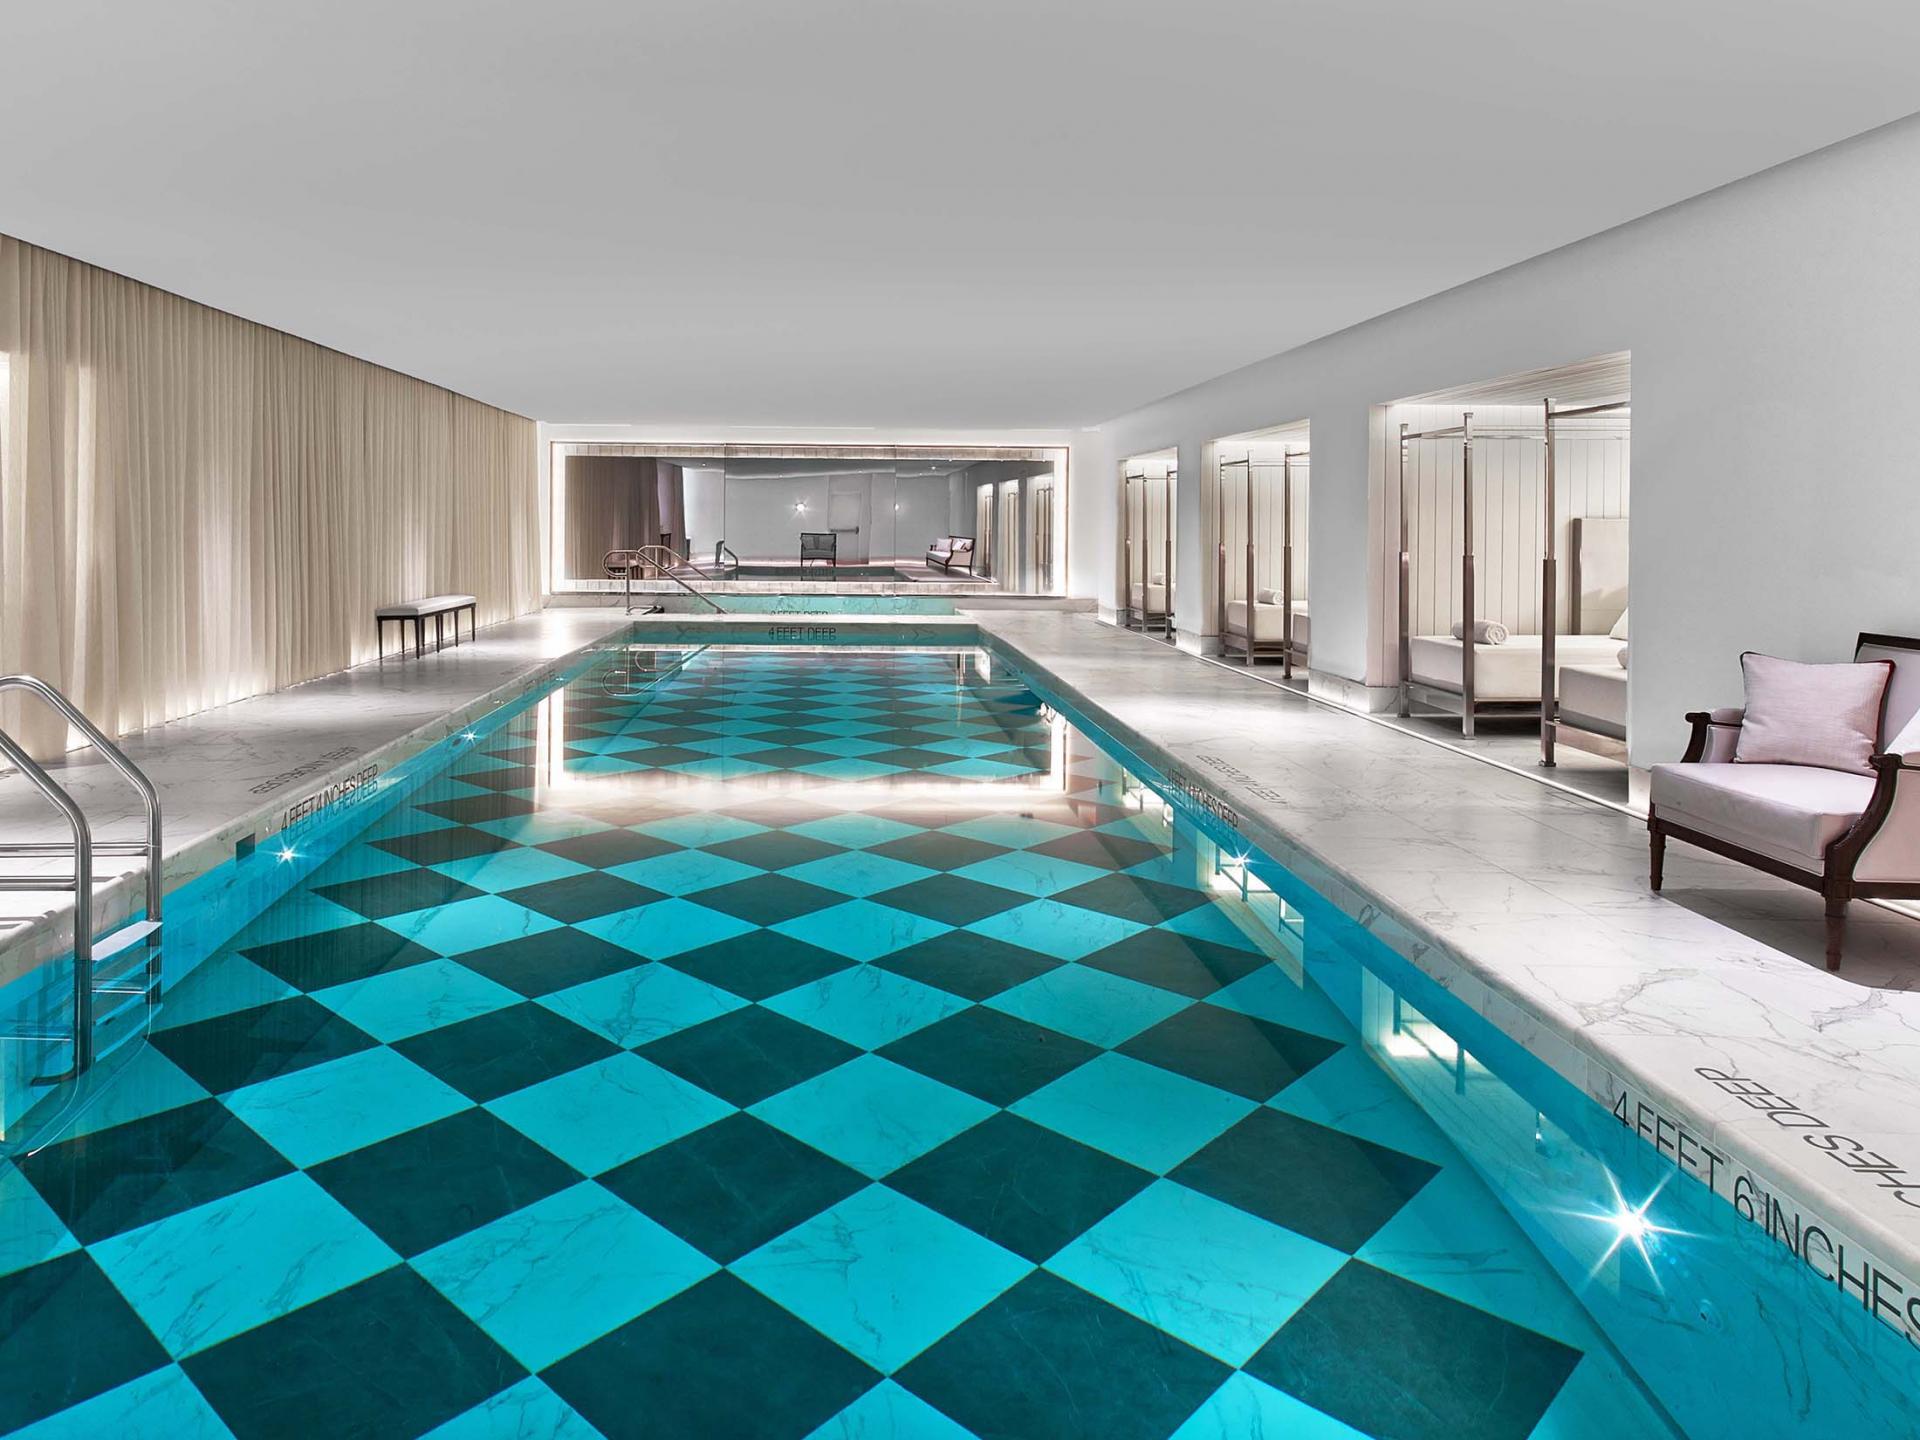 The interior swimming pool at Baccarat Hotel